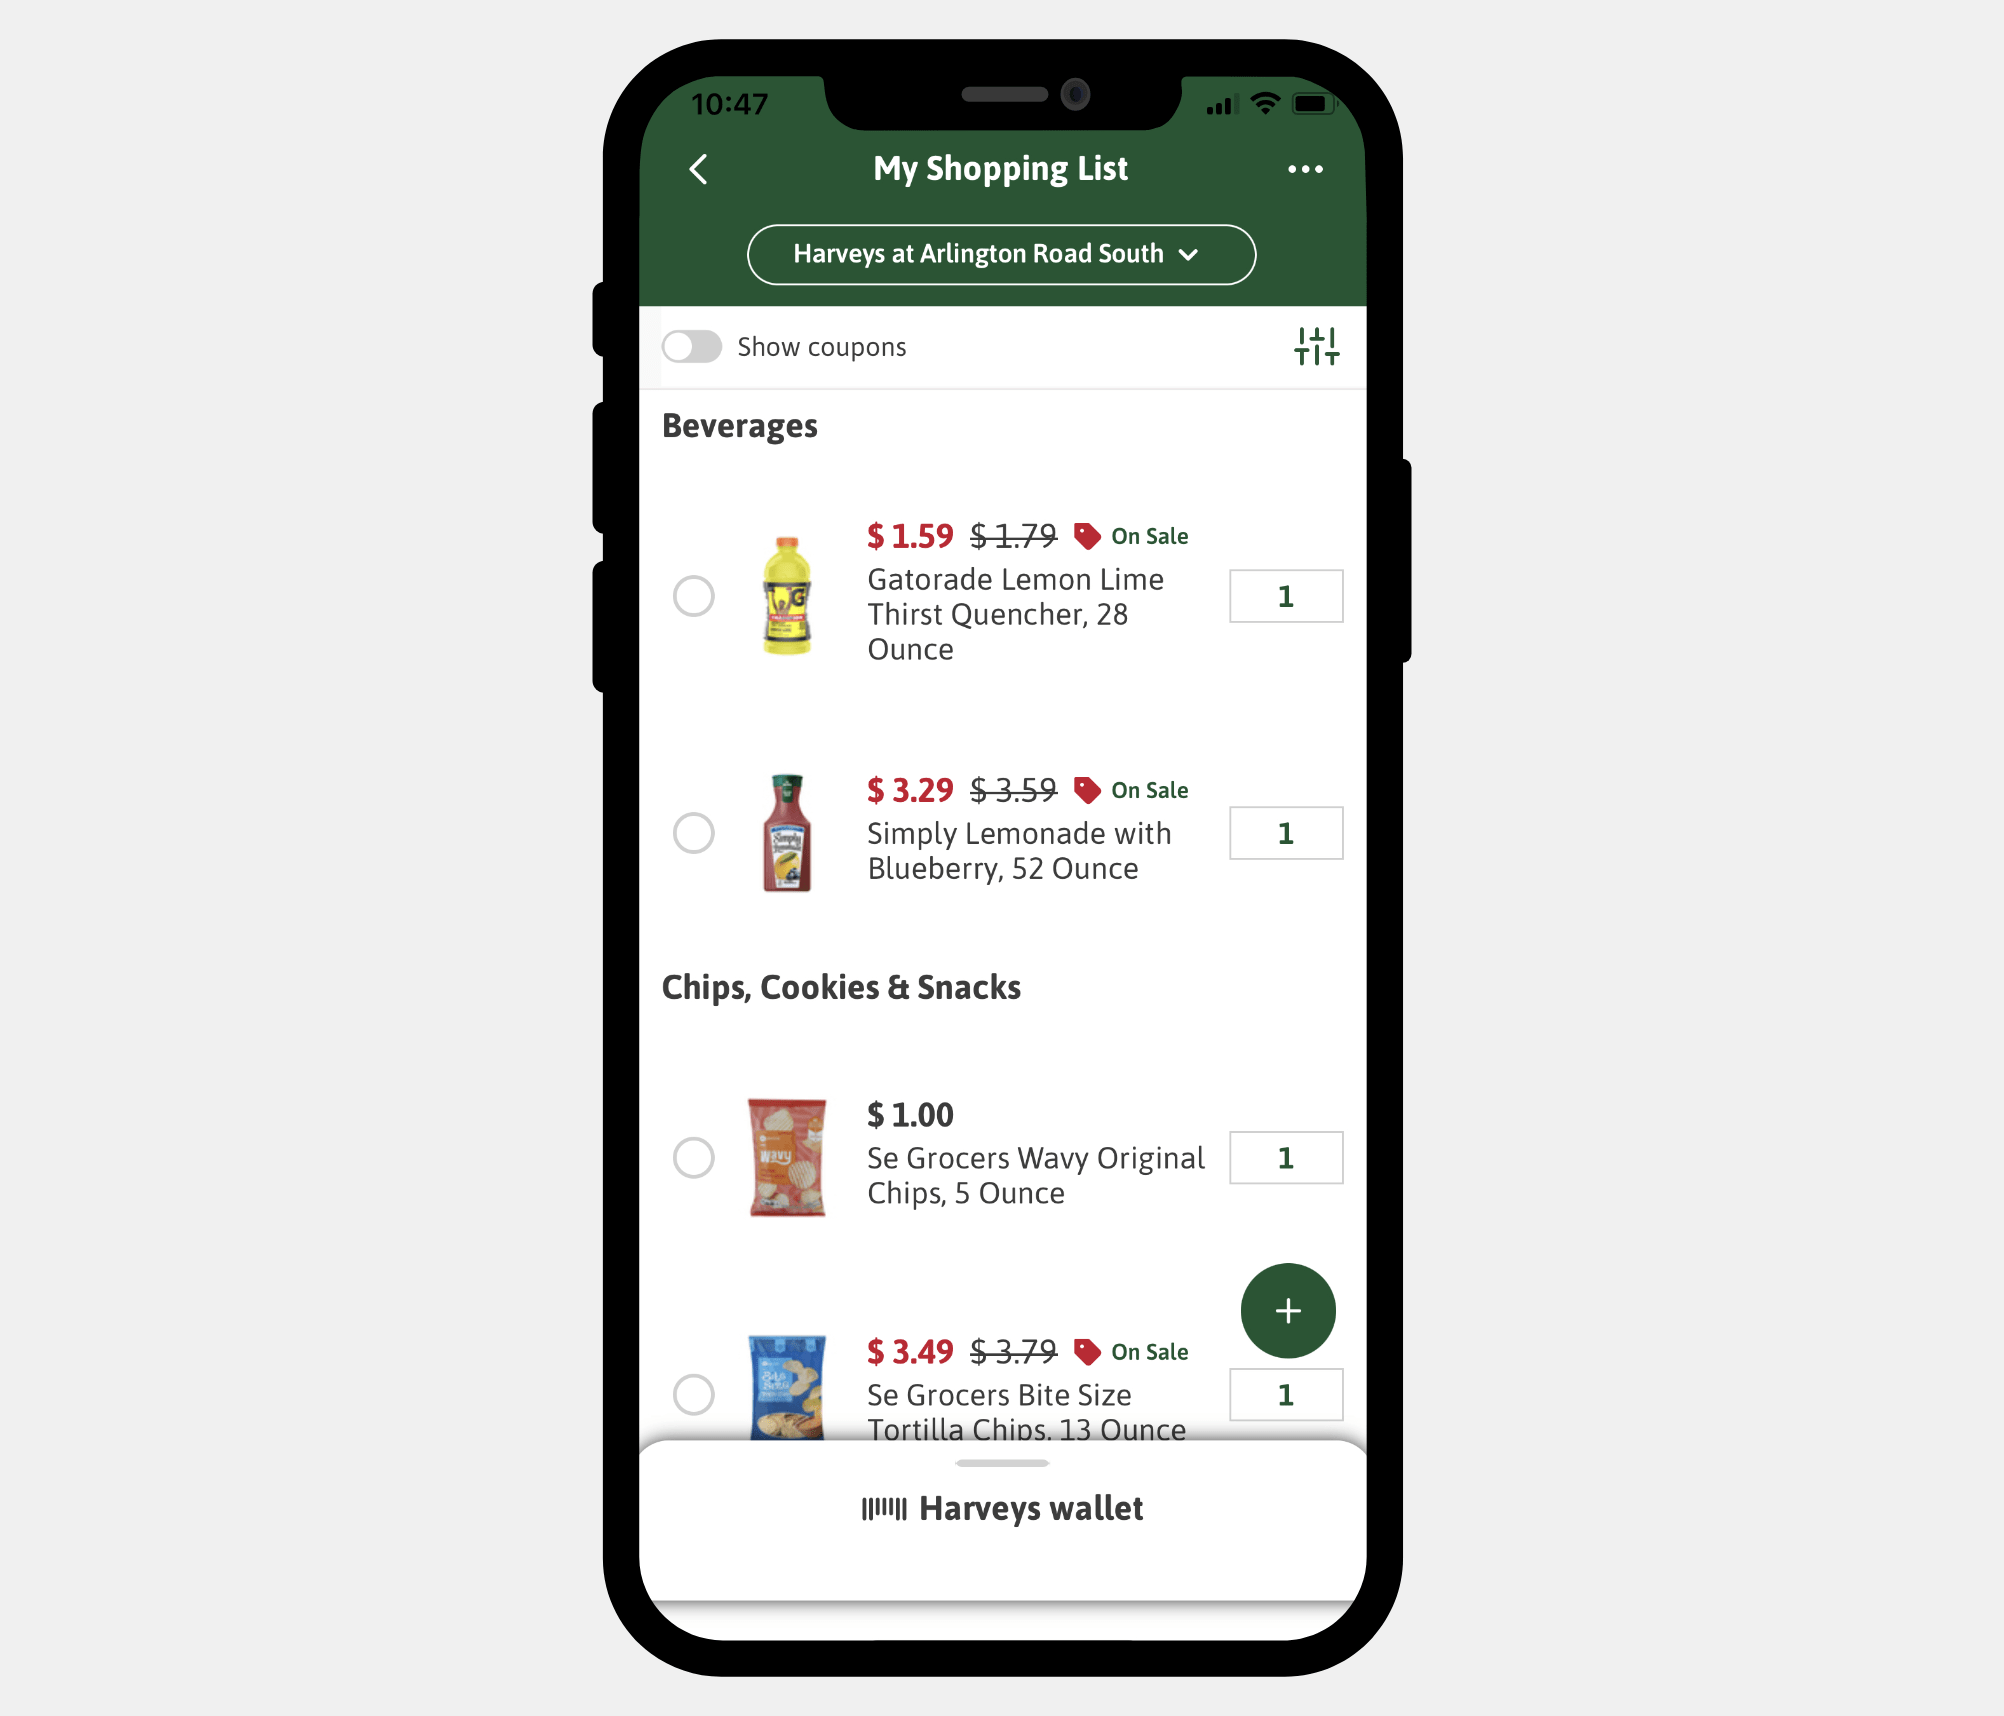 Image of a phone using the shopping list feature on the Harveys app